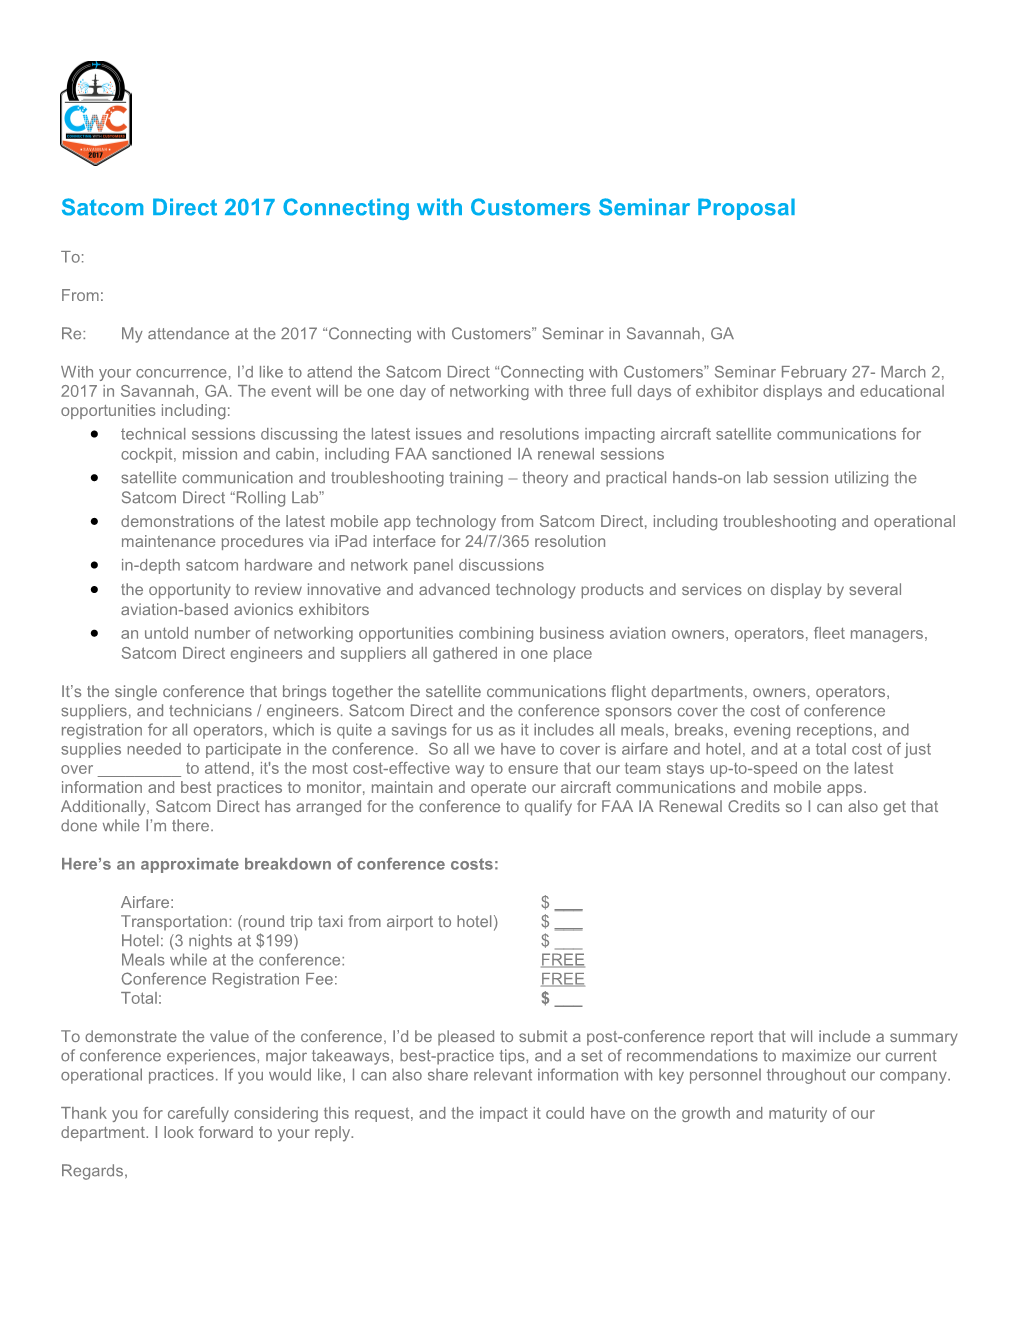 Satcom Direct 2017 Connecting with Customers Seminarproposal